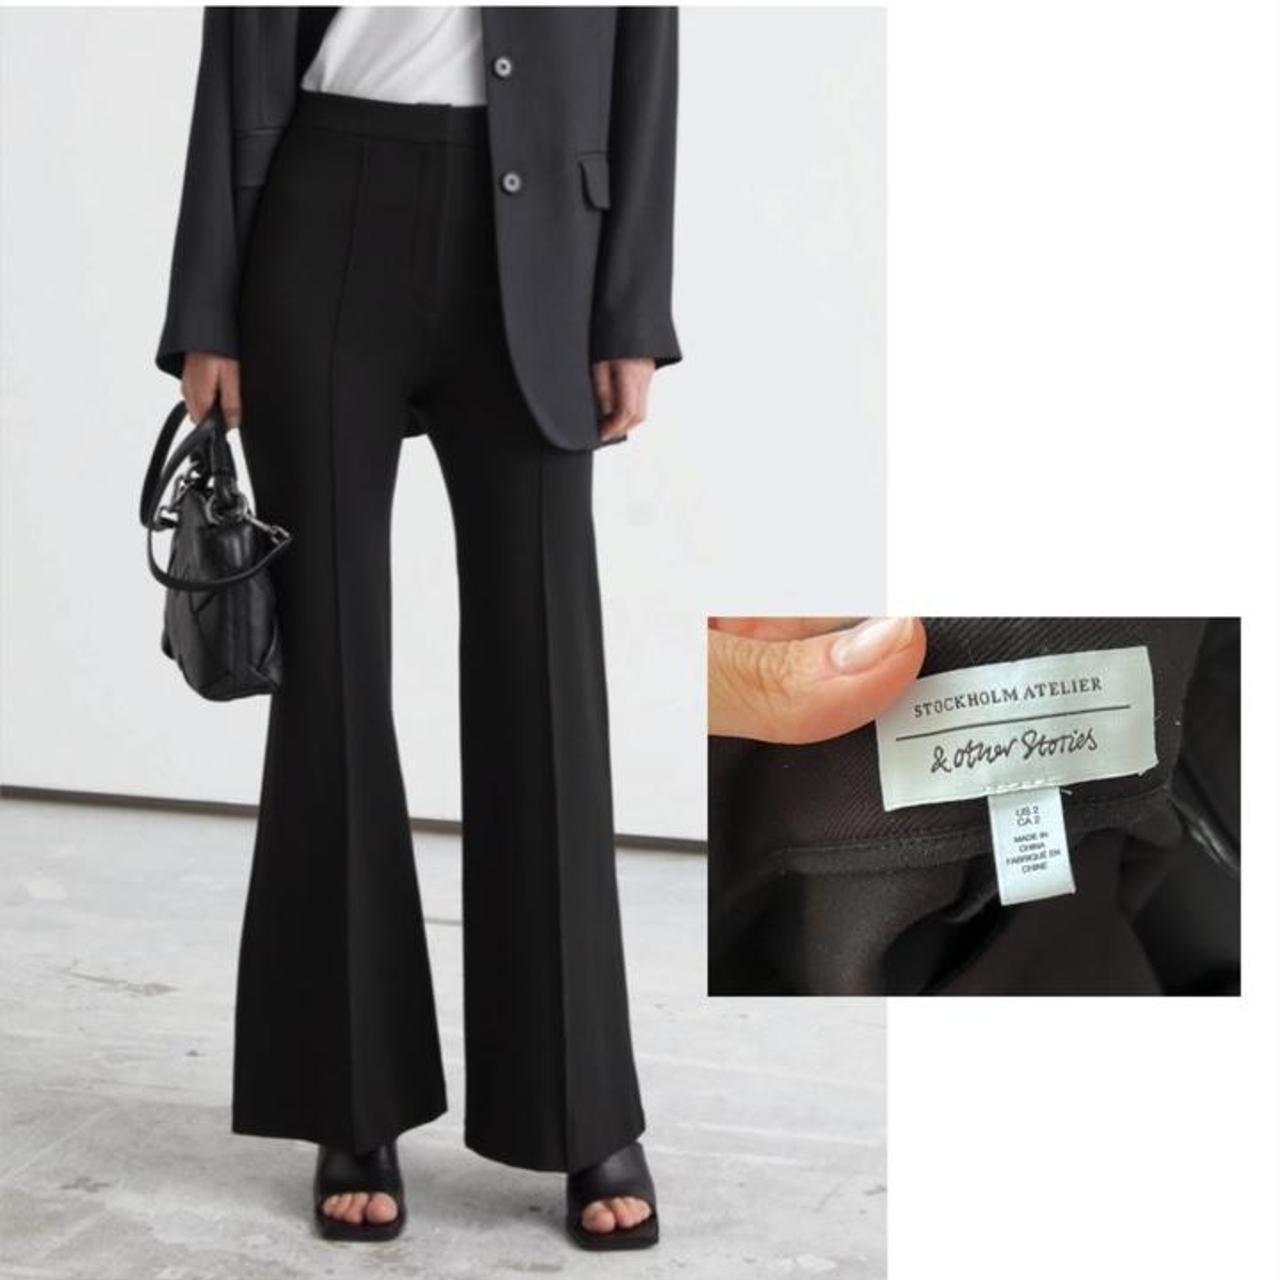  OTHER STORIES Tight Ribbed Flared Trousers in Black